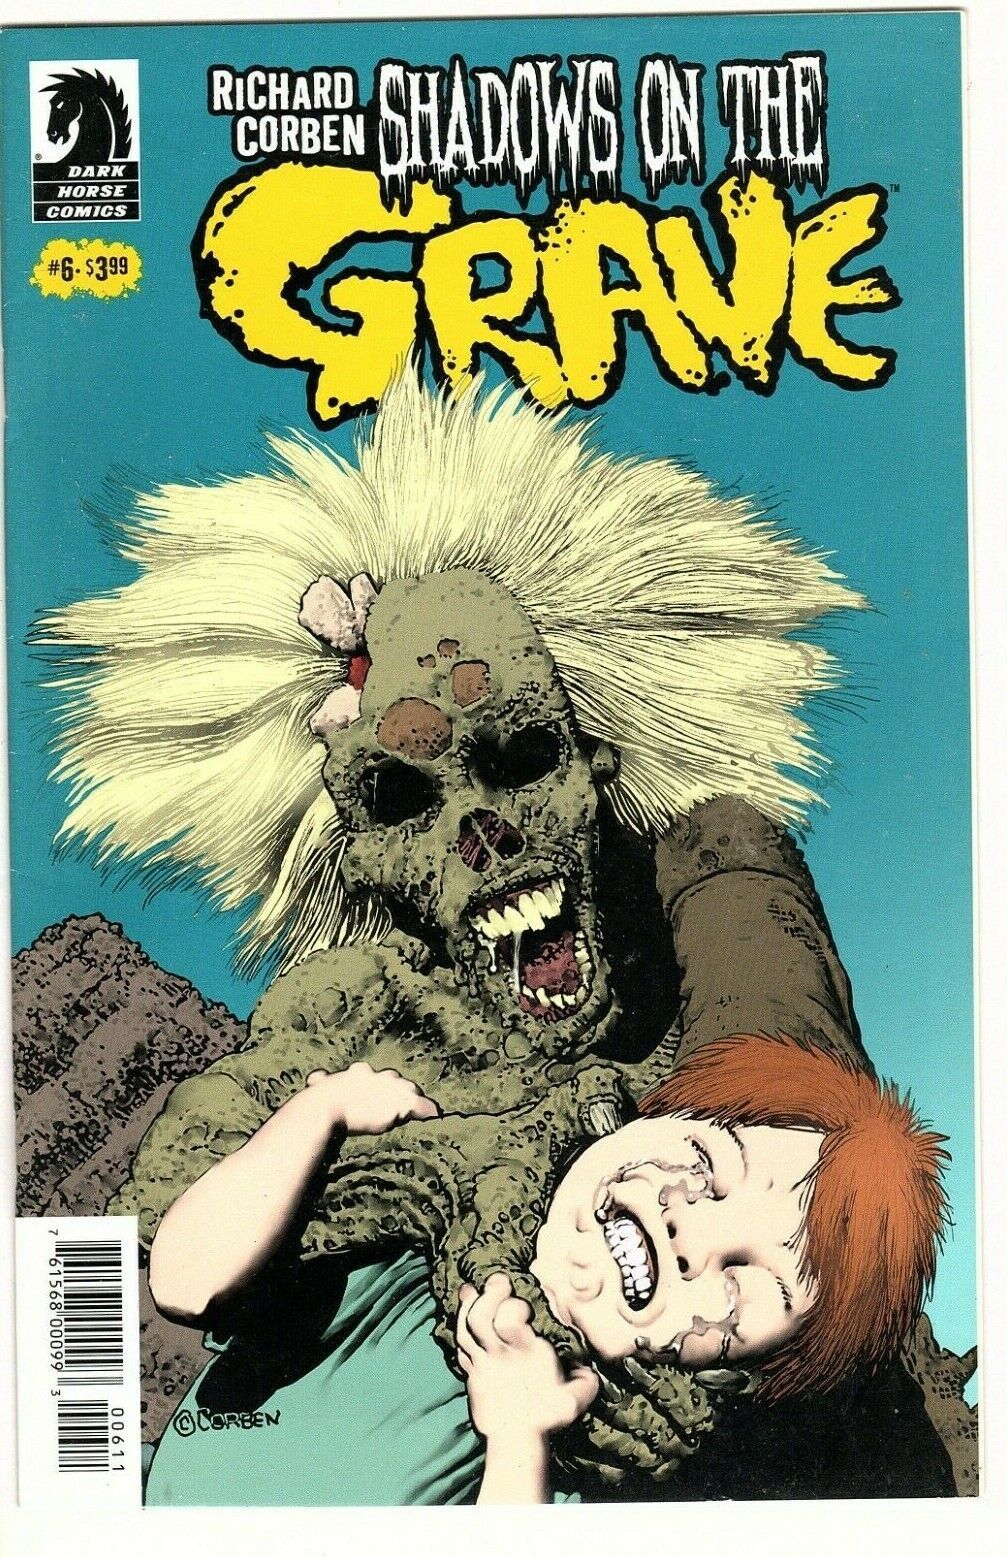 Primary image for Richard Corben's Shadows on the Grave # 6 - Dark Horse Comics